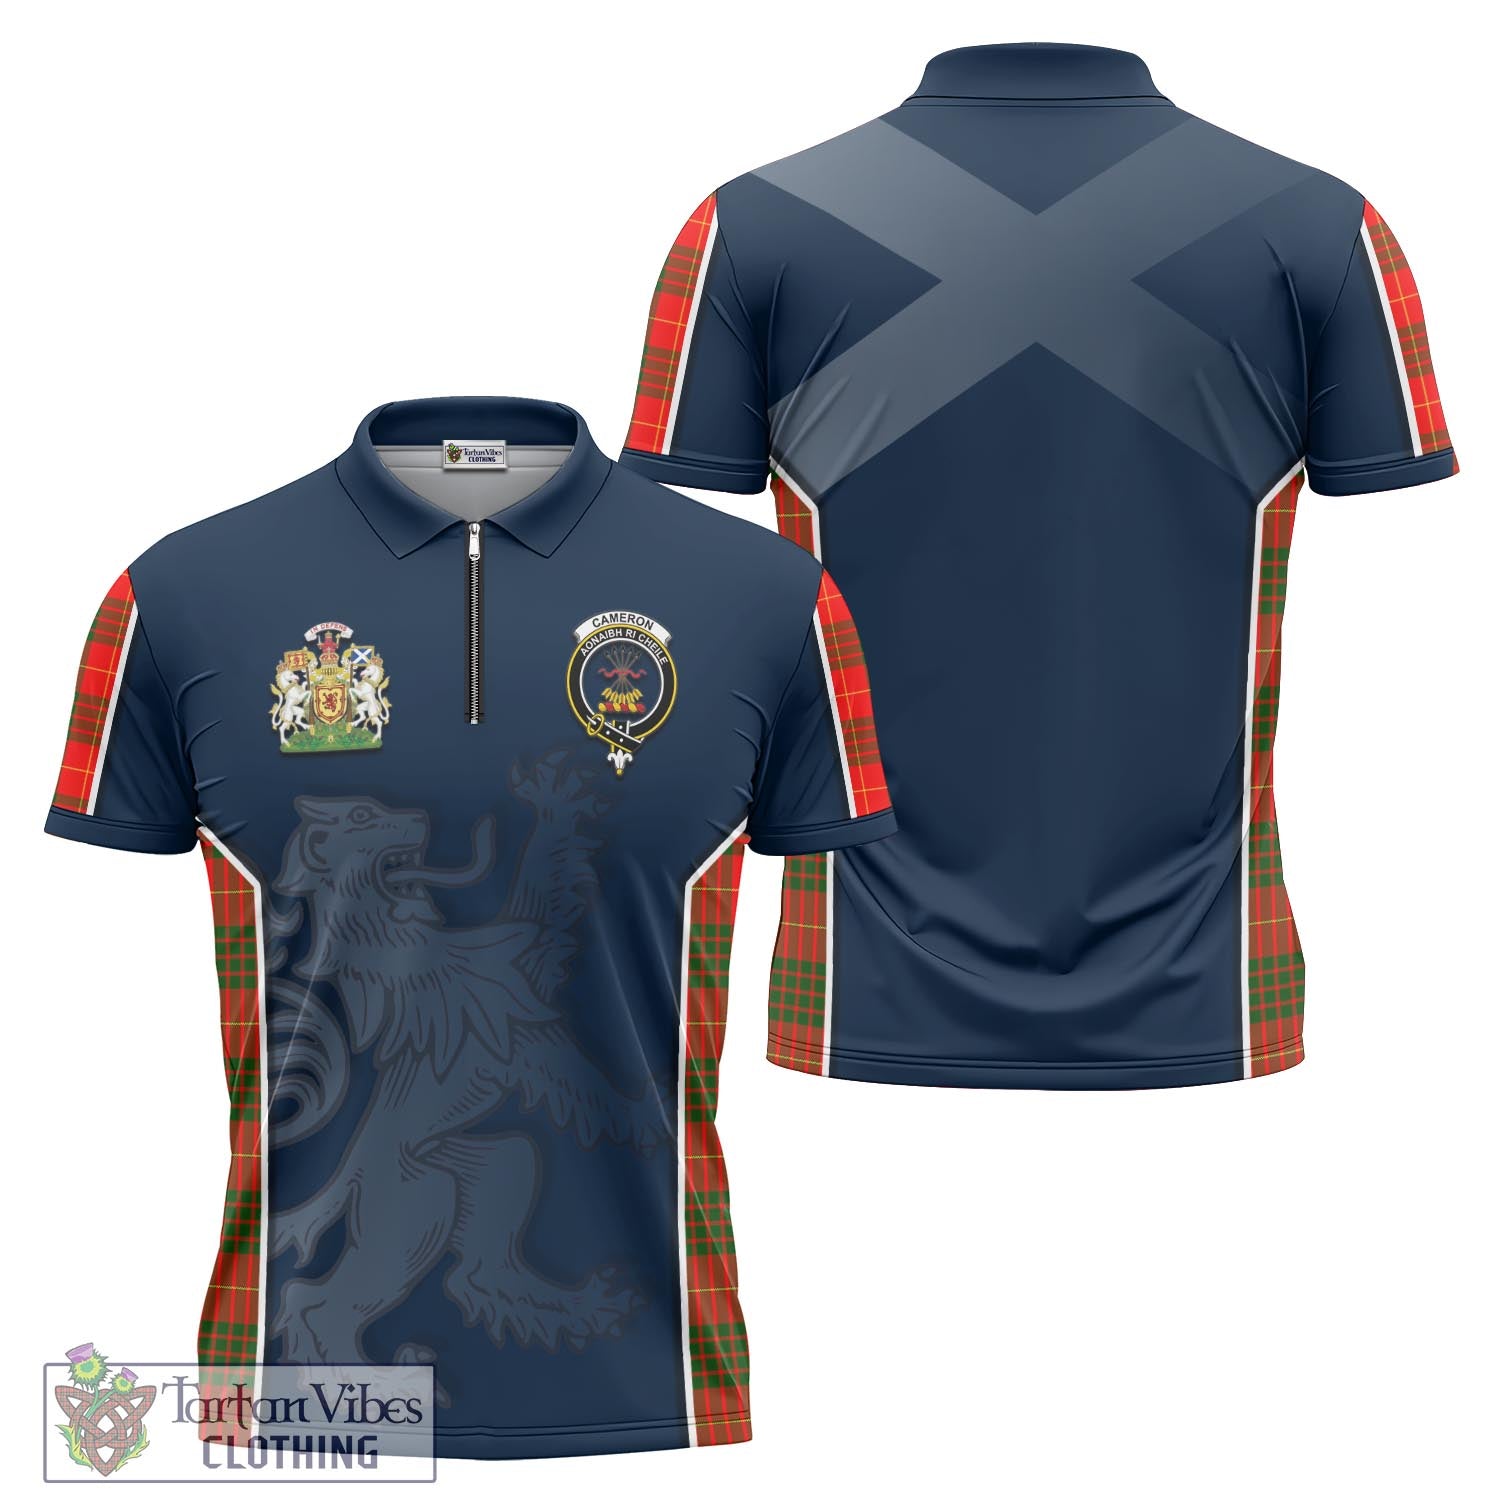 Tartan Vibes Clothing Cameron Modern Tartan Zipper Polo Shirt with Family Crest and Lion Rampant Vibes Sport Style